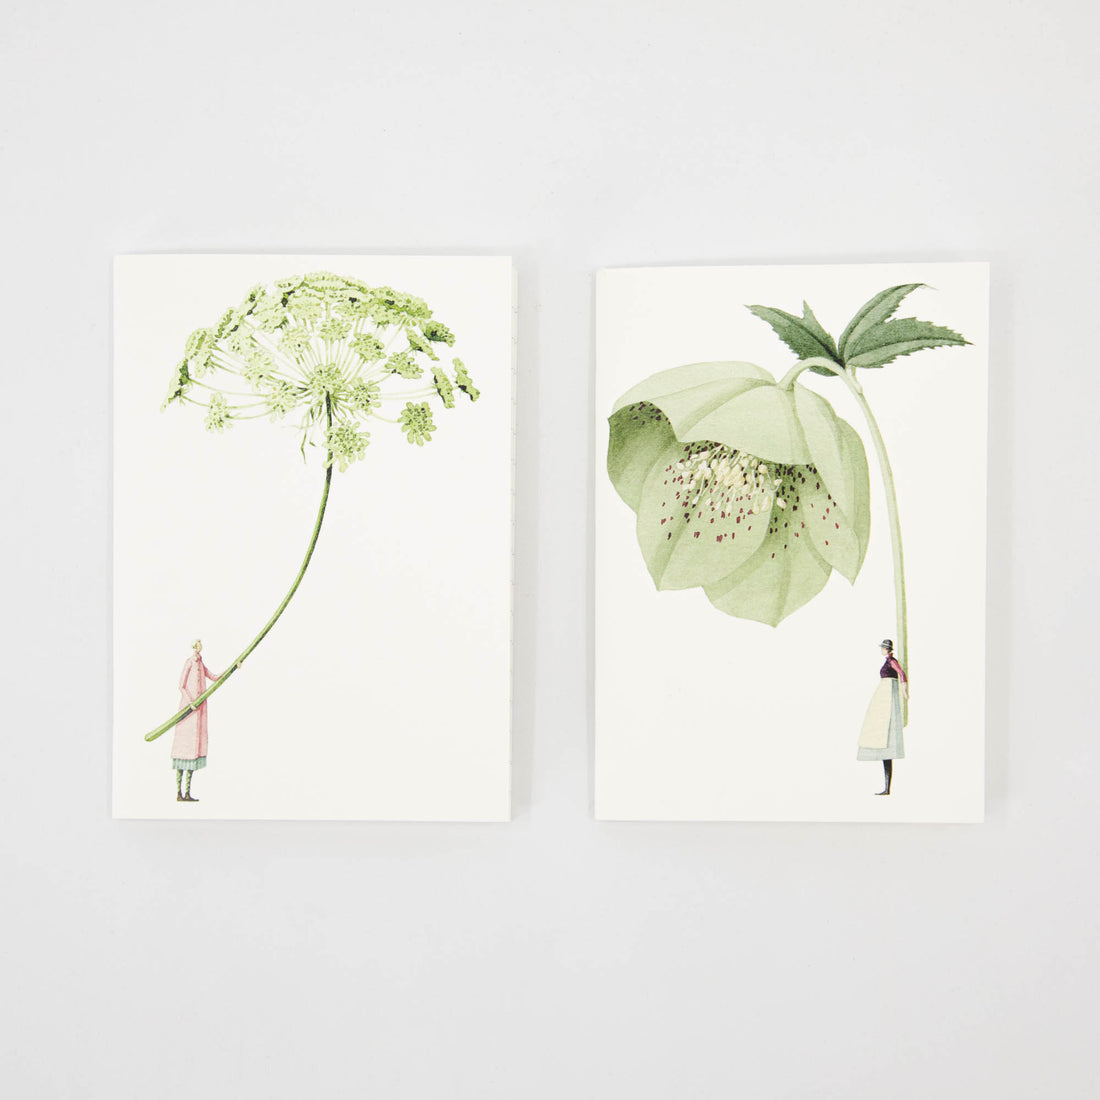 Two illustrations featuring figures with oversized plant features, inspired by Laura&